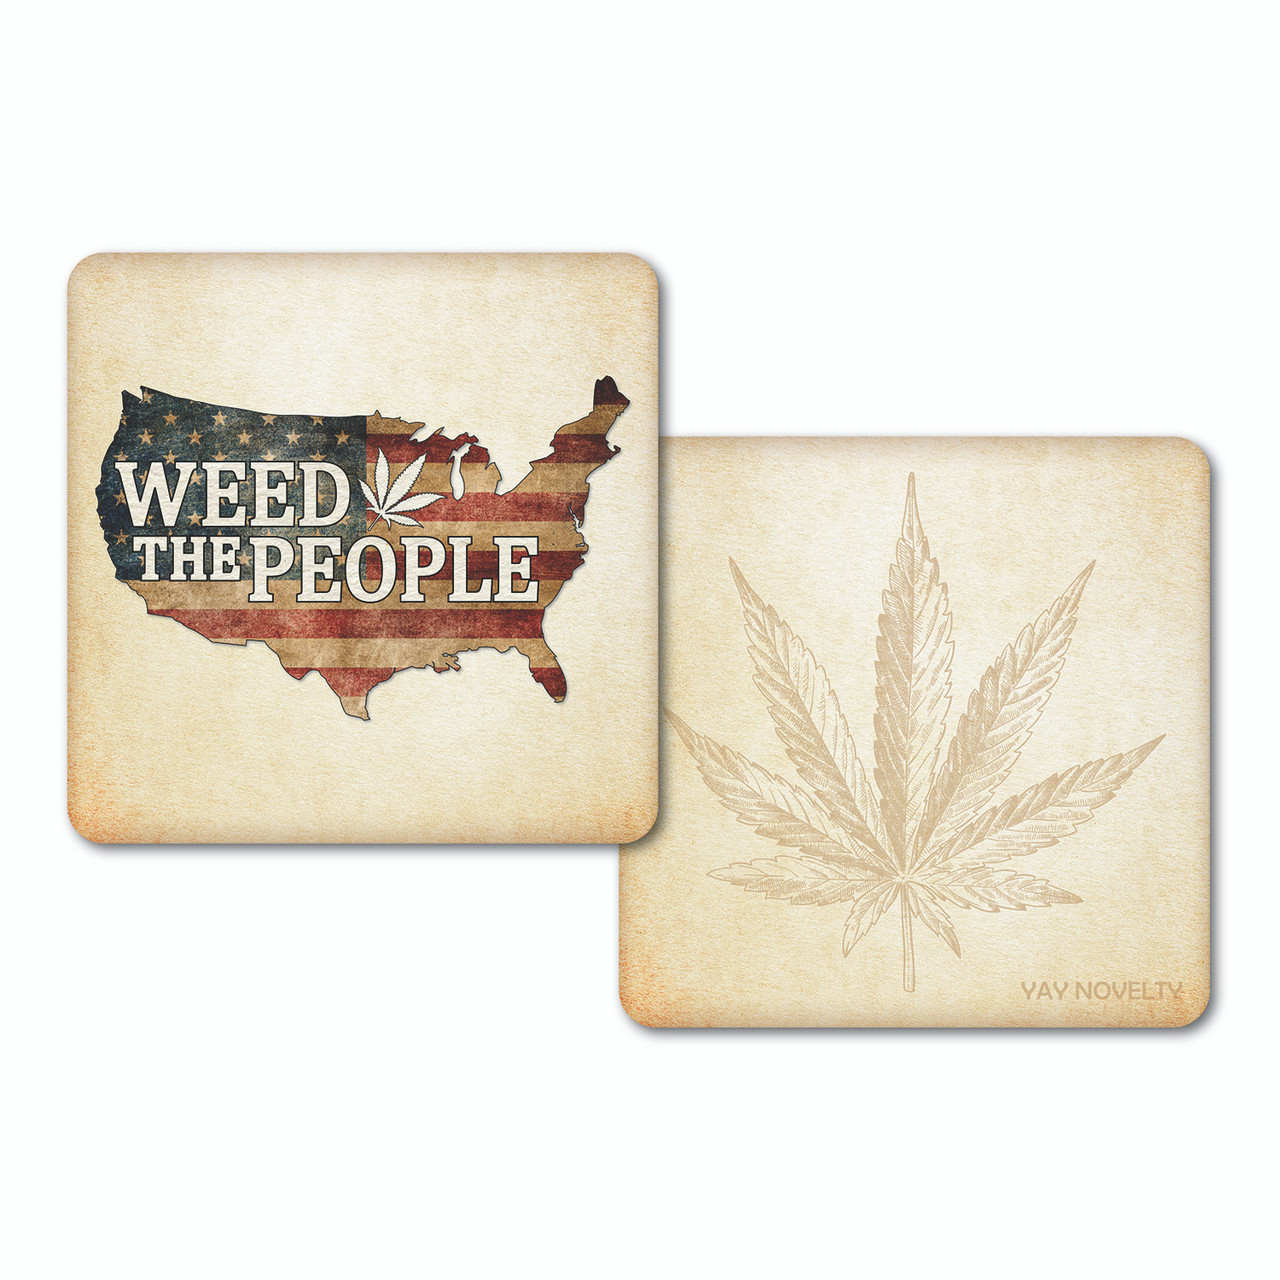 this is the weed leaf stencils set